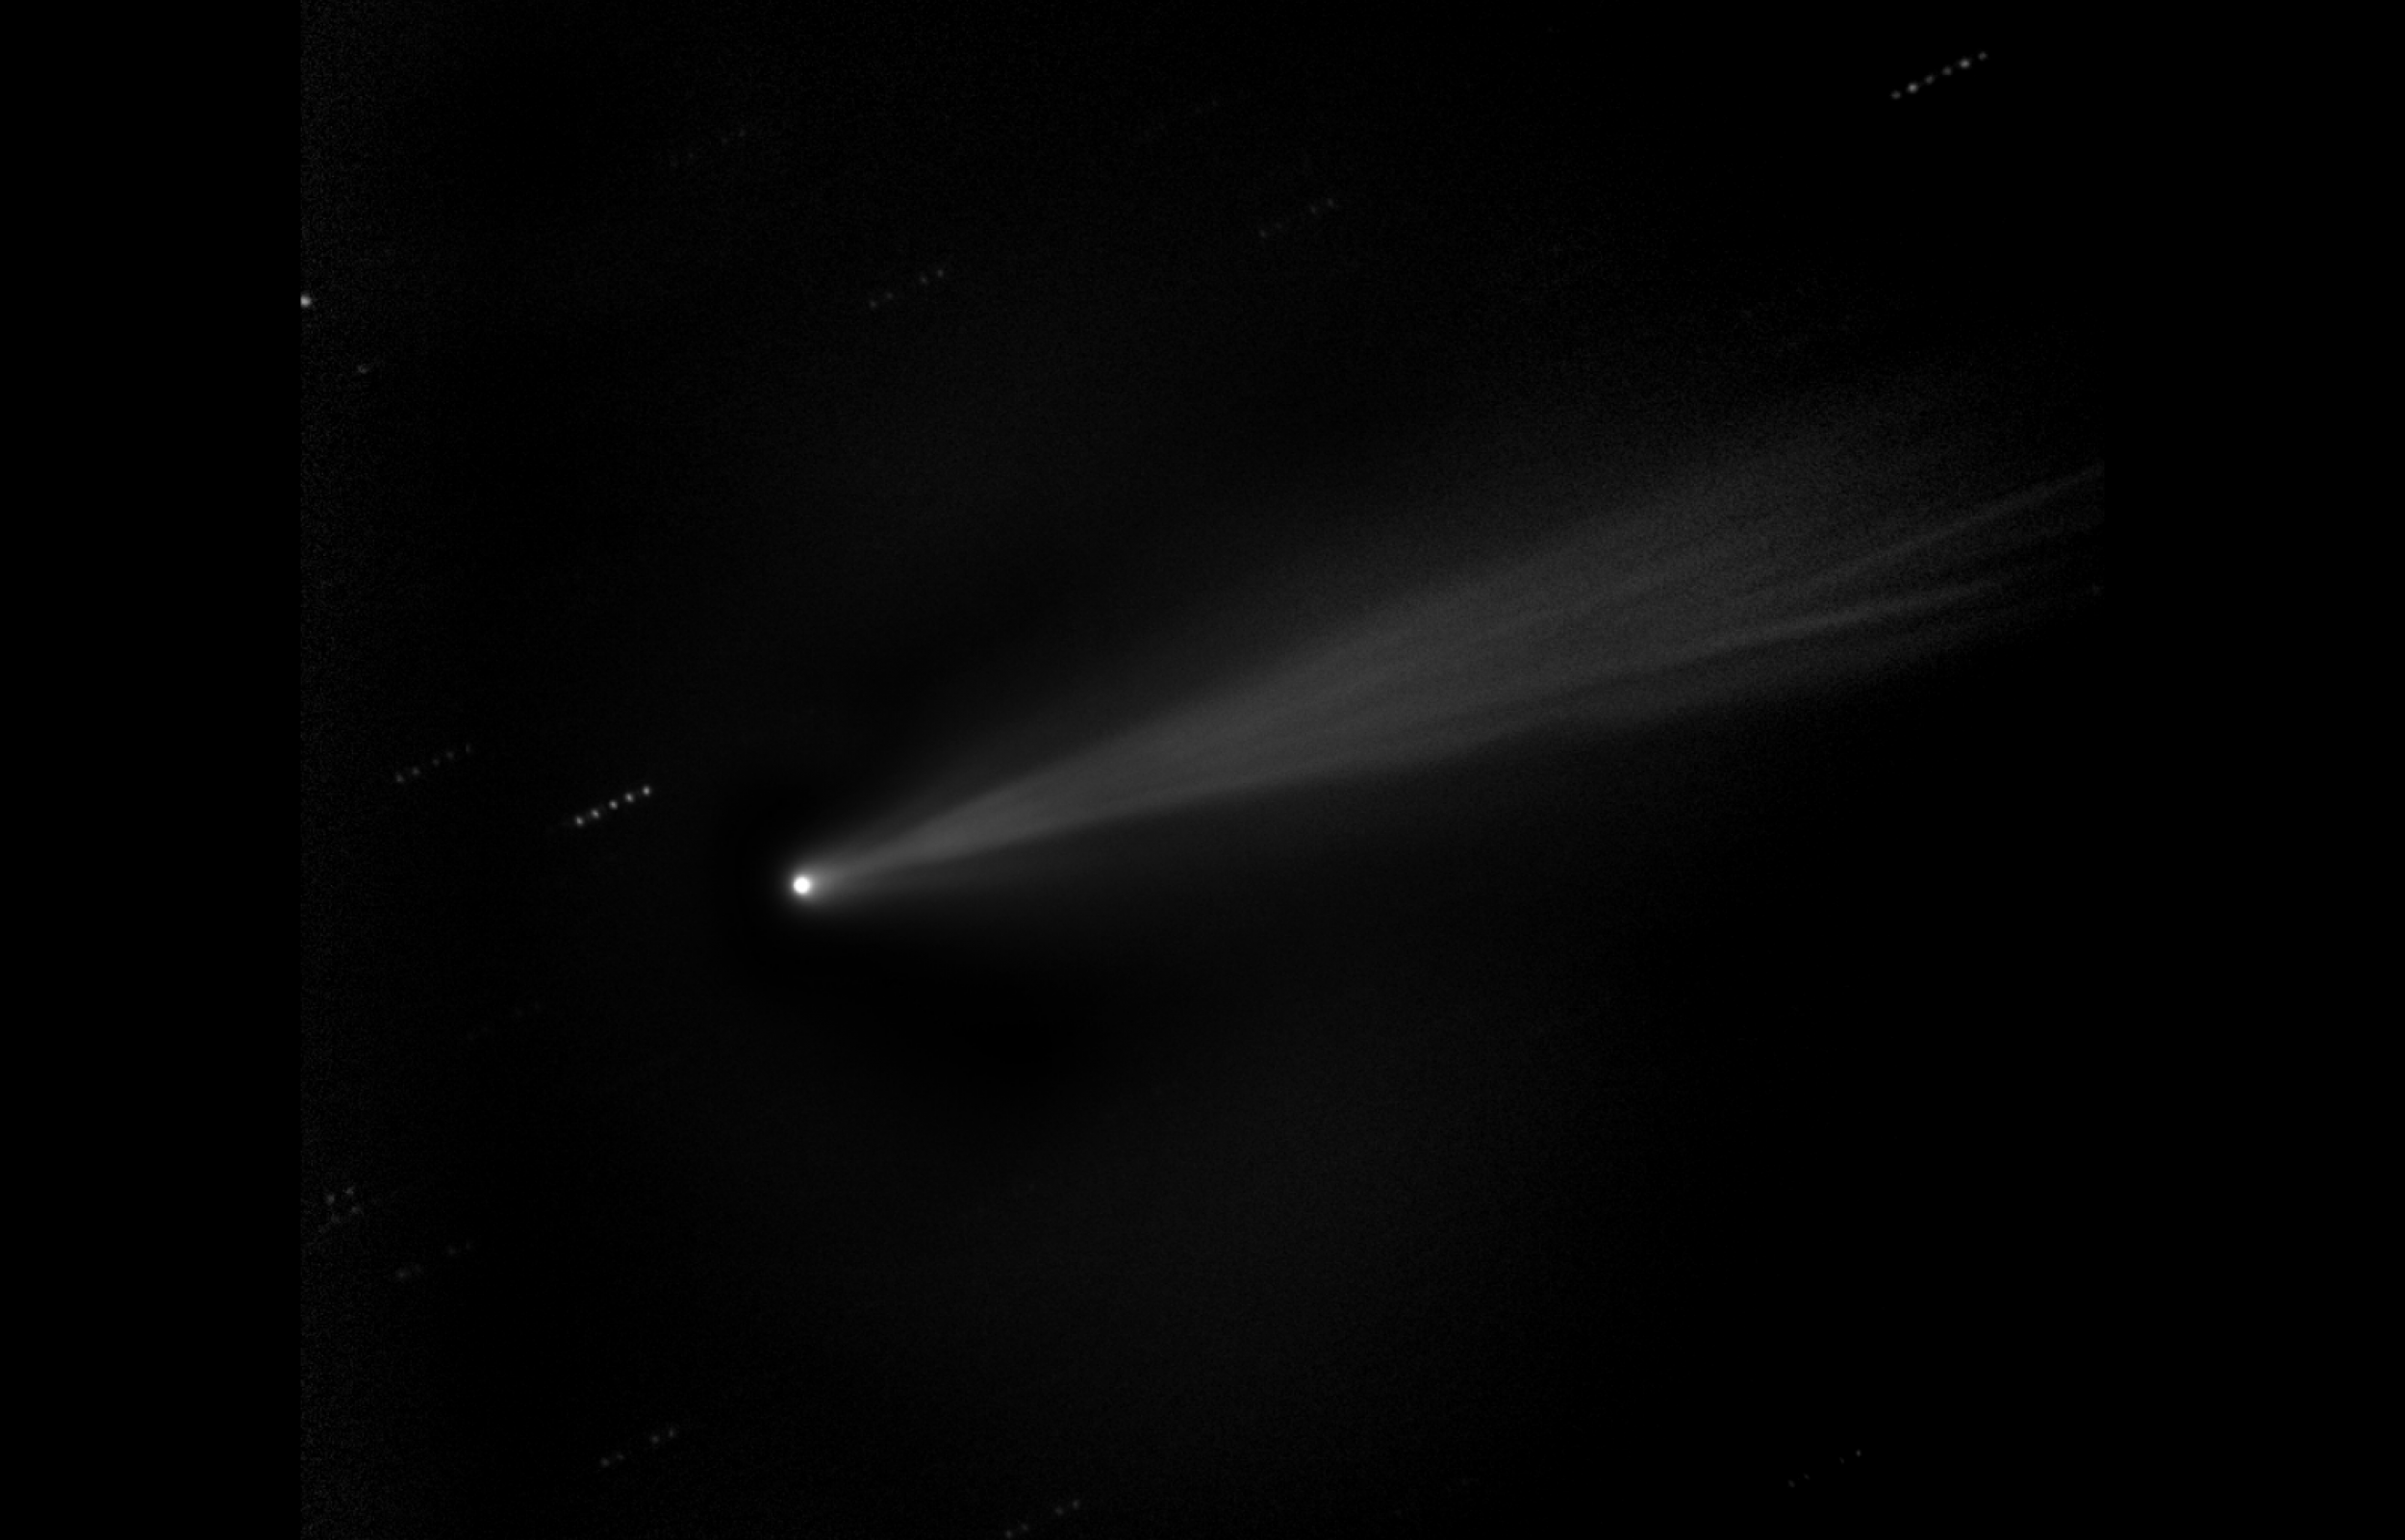 Comet ISON NASA Images Reveal Object Is Still Intact; Interactive